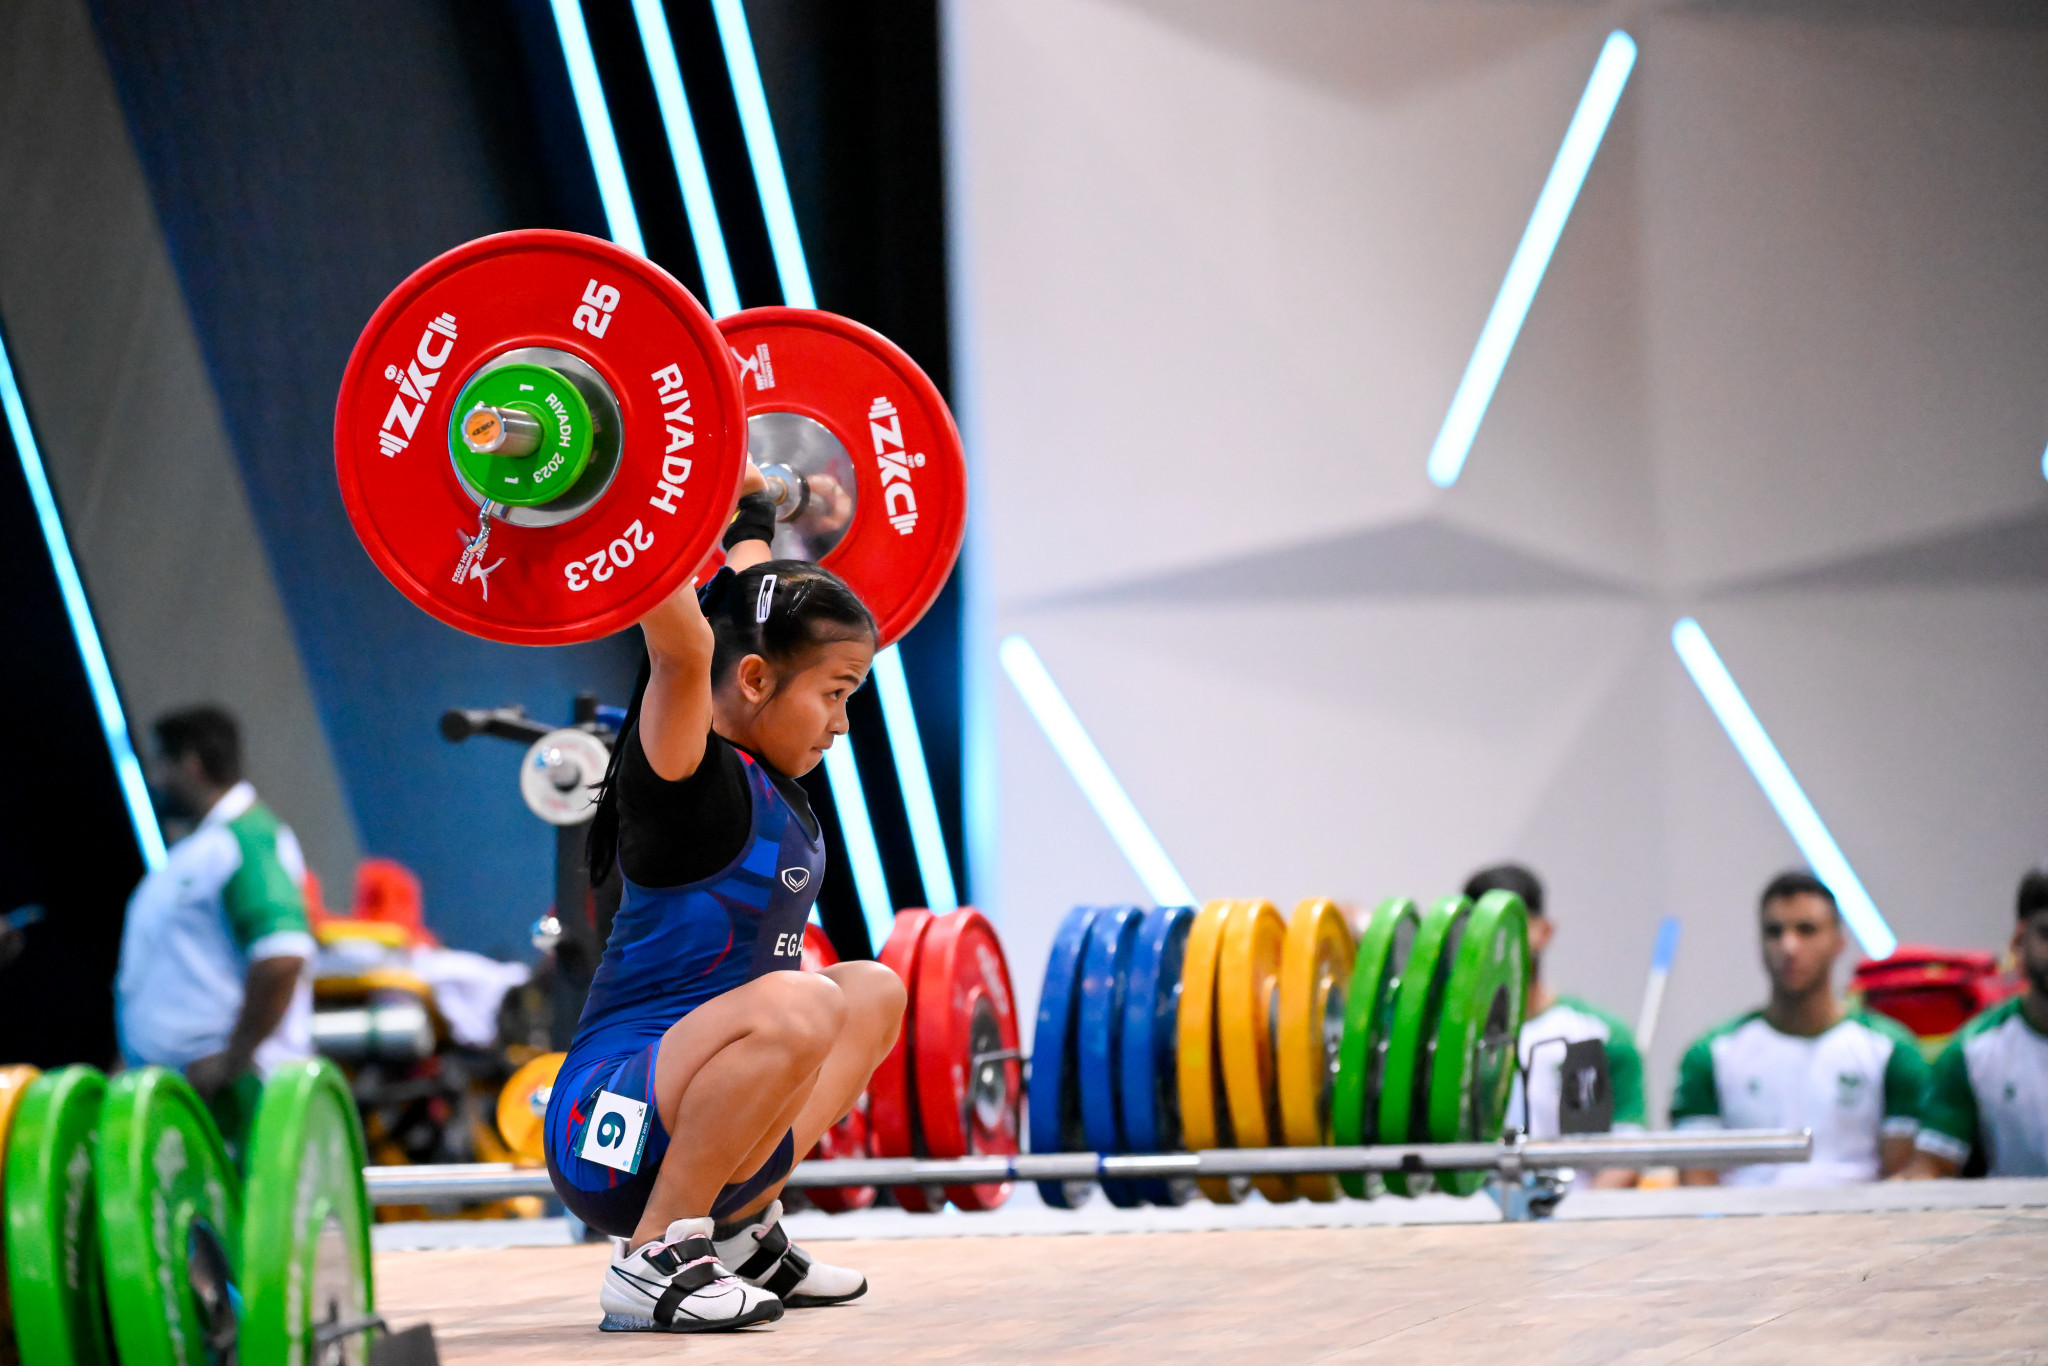 Weightlifters wild screams greet landmark moment for sport in Madagascar